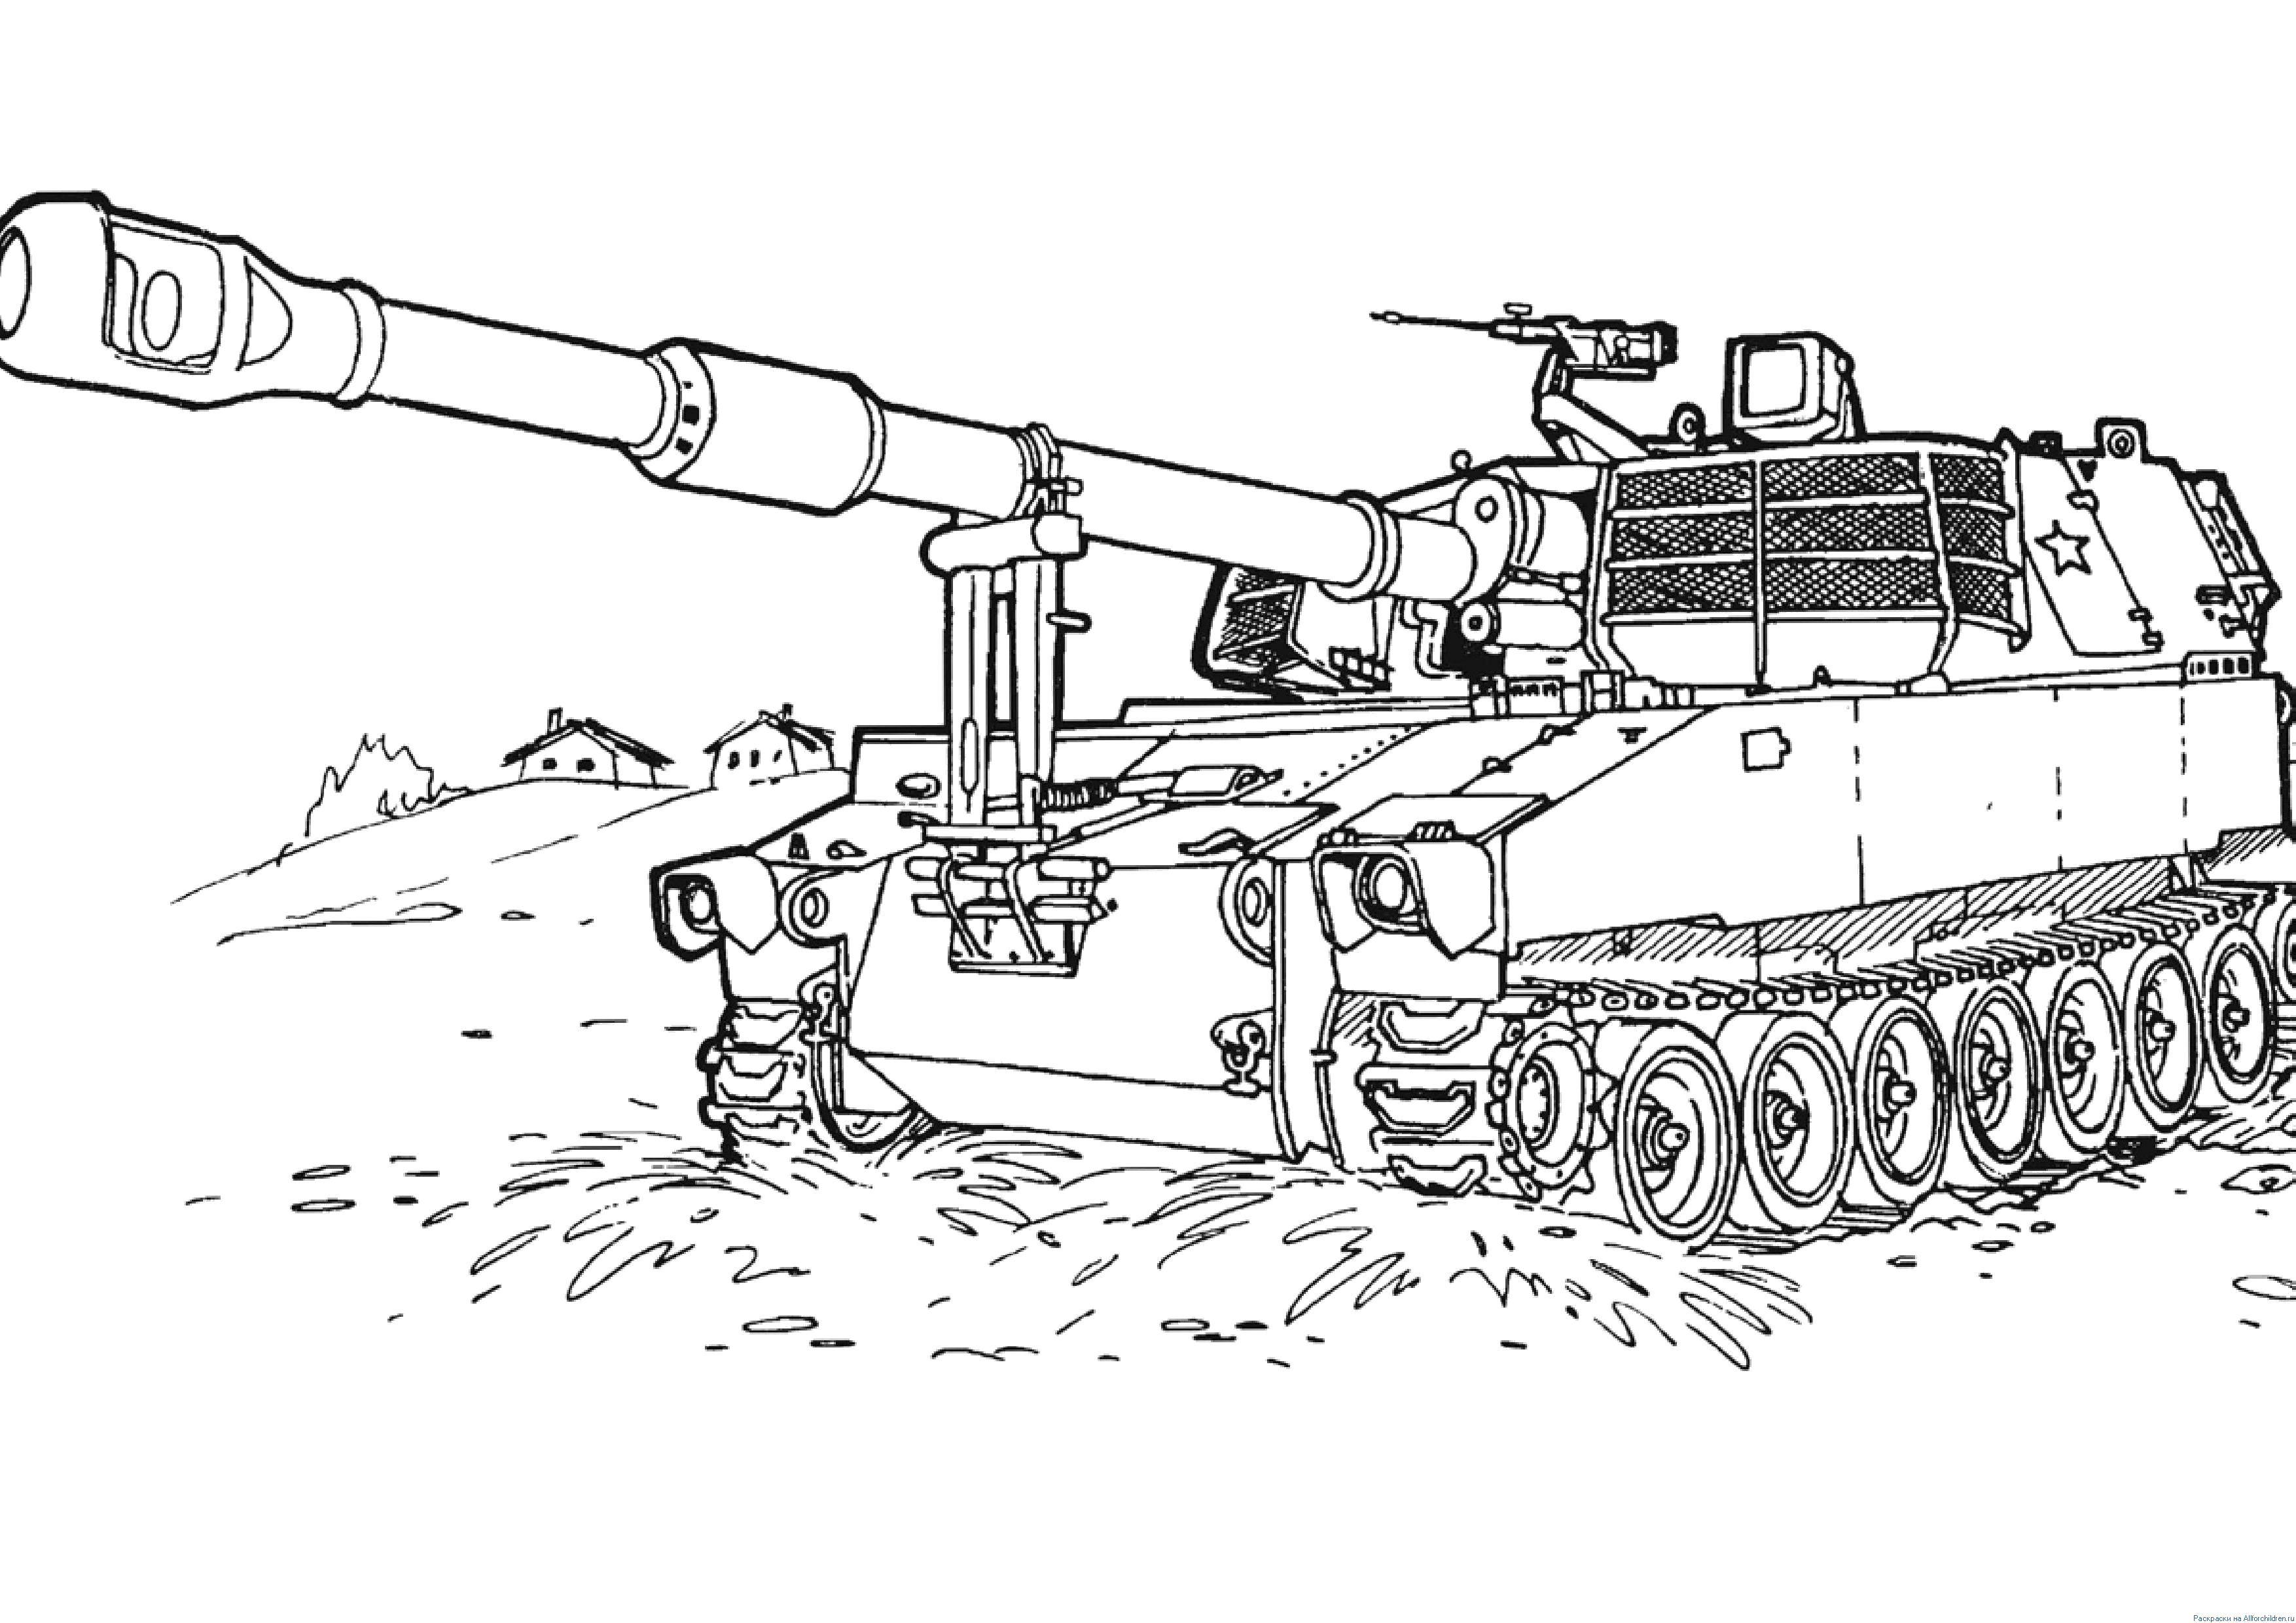 Coloring Battle tank. Category military coloring pages. Tags:  Military, vehicles, tank, arms.